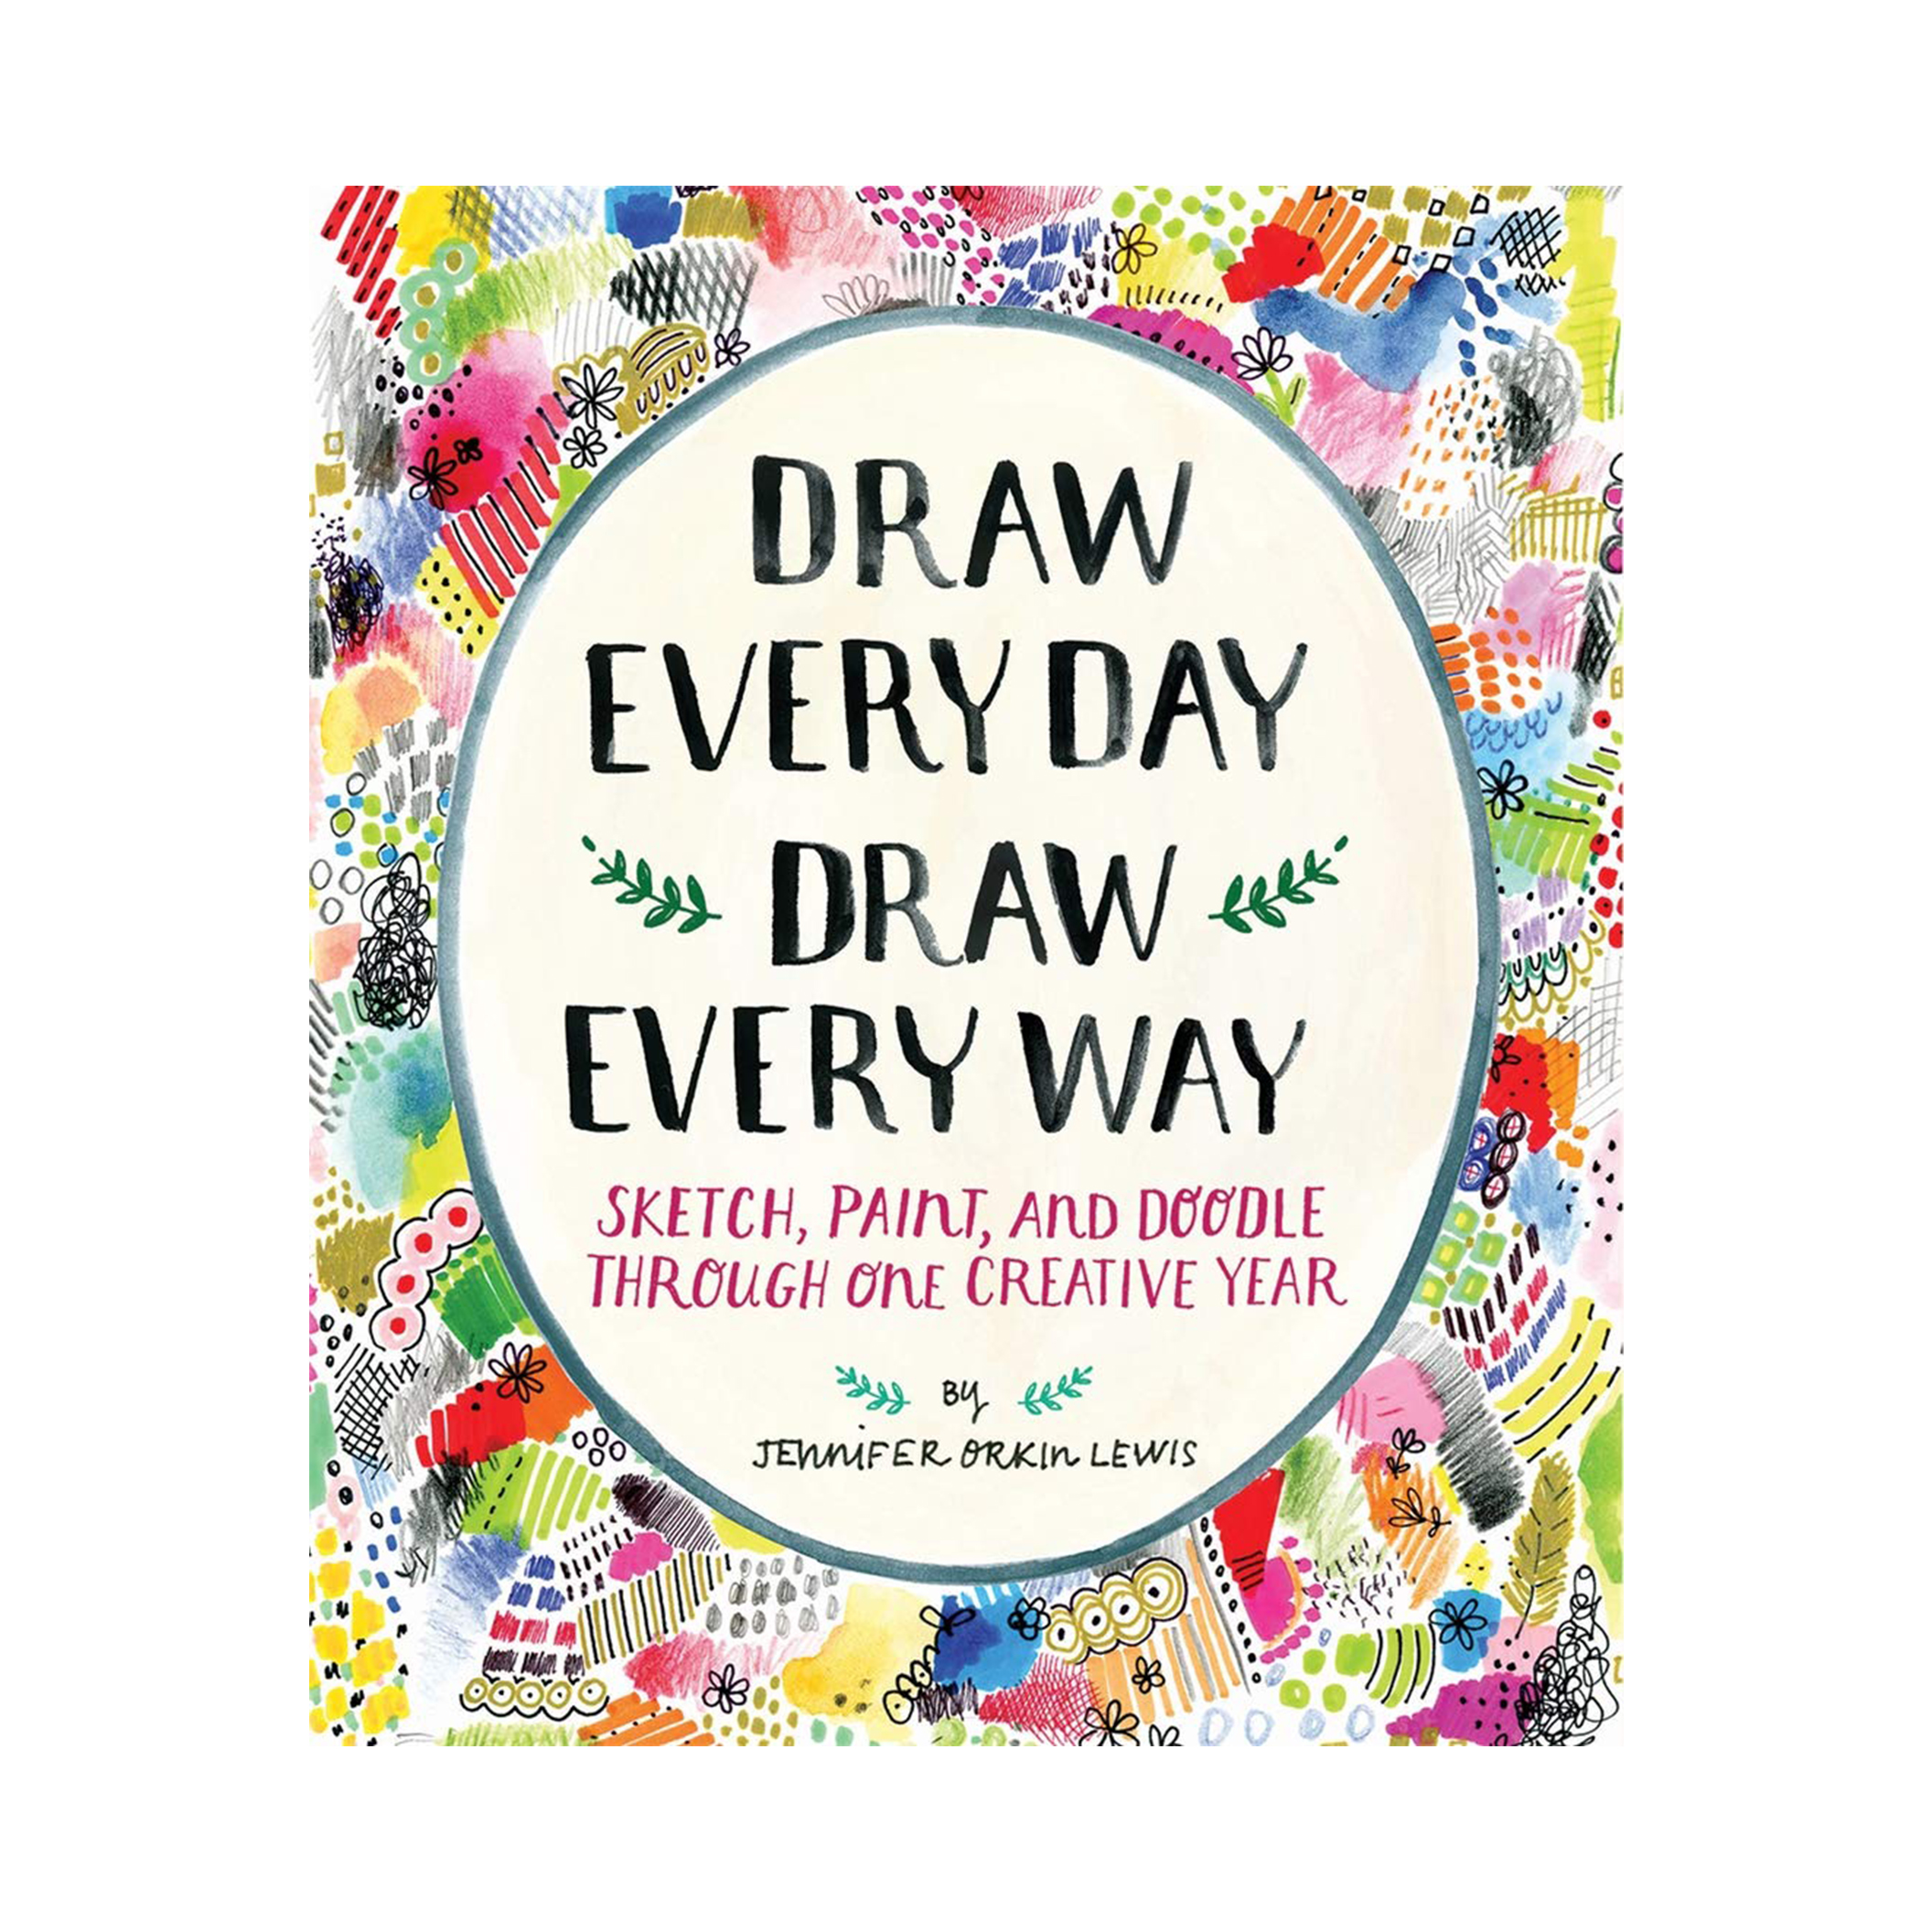 Jennifer Orkin Lewis Draw Every Day Draw Every Way A Guided Sketchbook